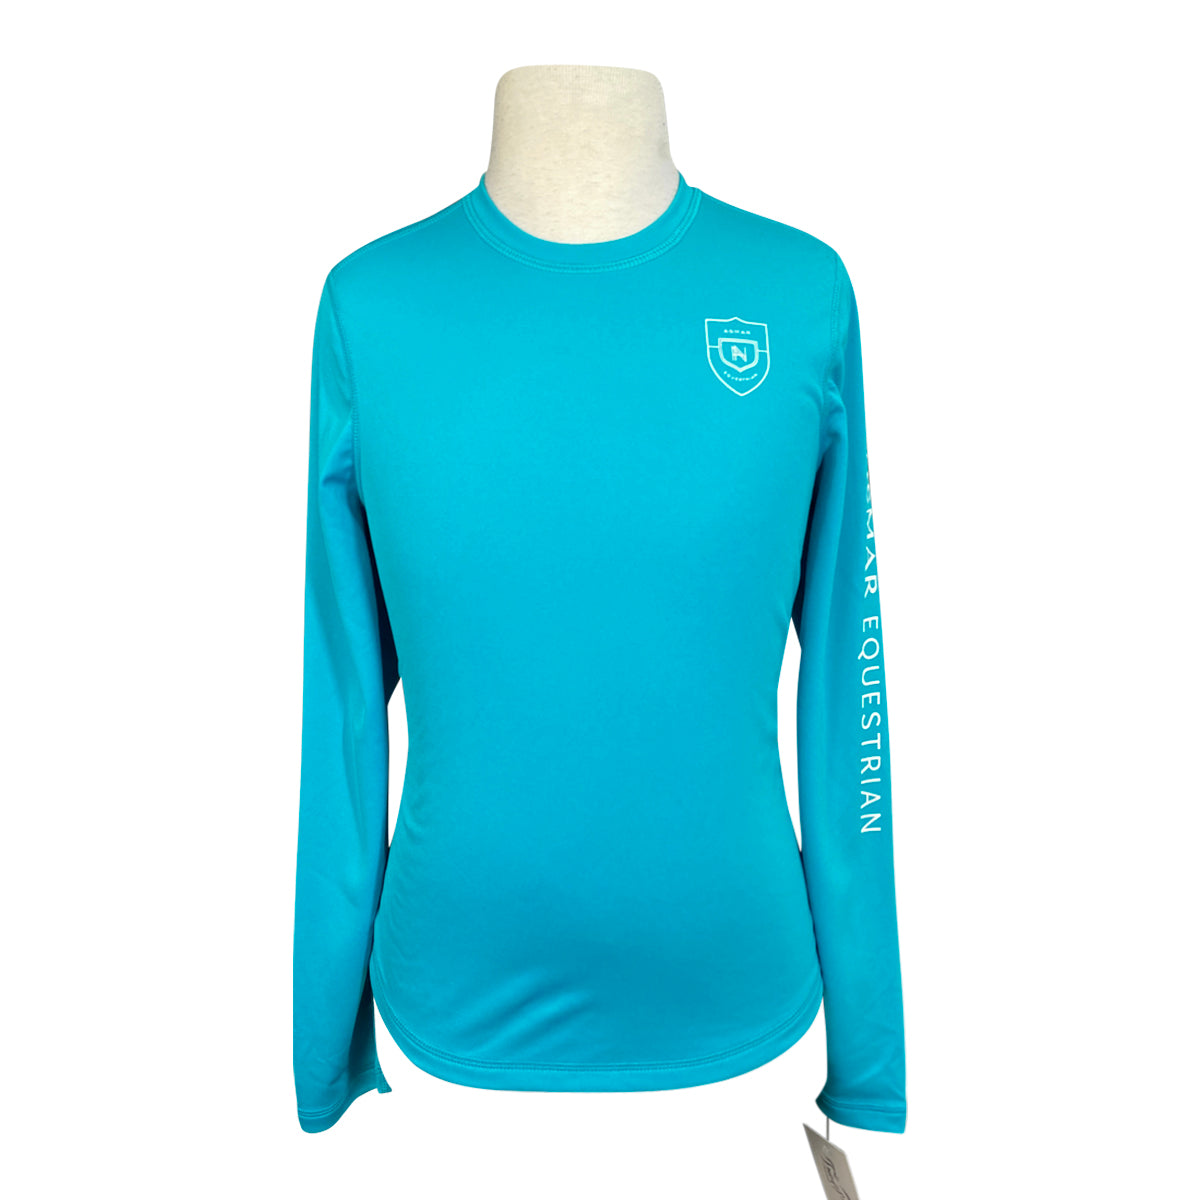 Asmar Equestrian Sustainable Sun Shirt in Turquoise